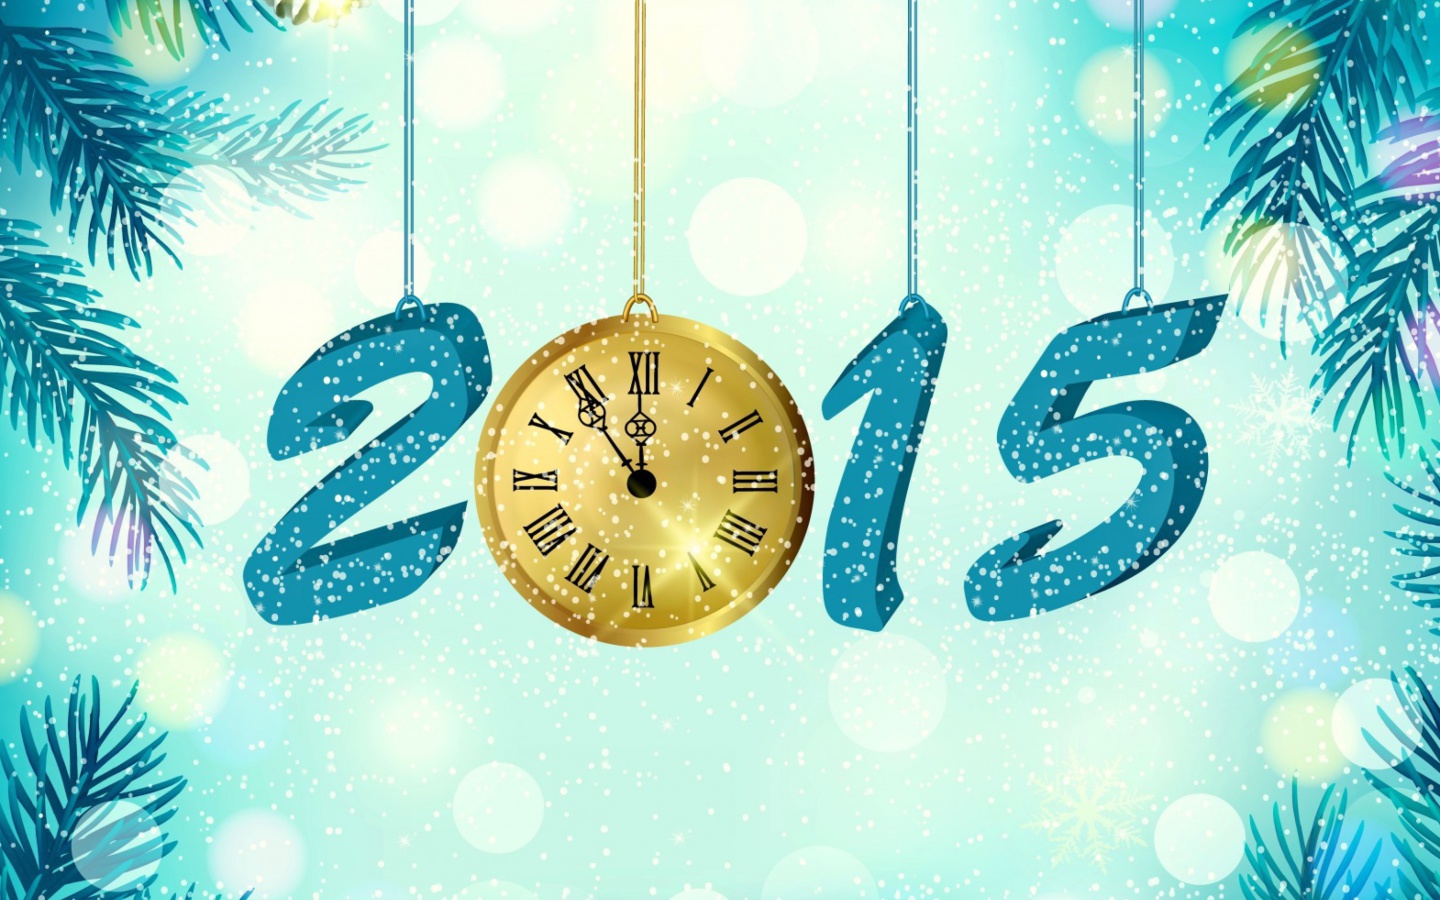 Das Happy New Year 2015 with Clock Wallpaper 1440x900